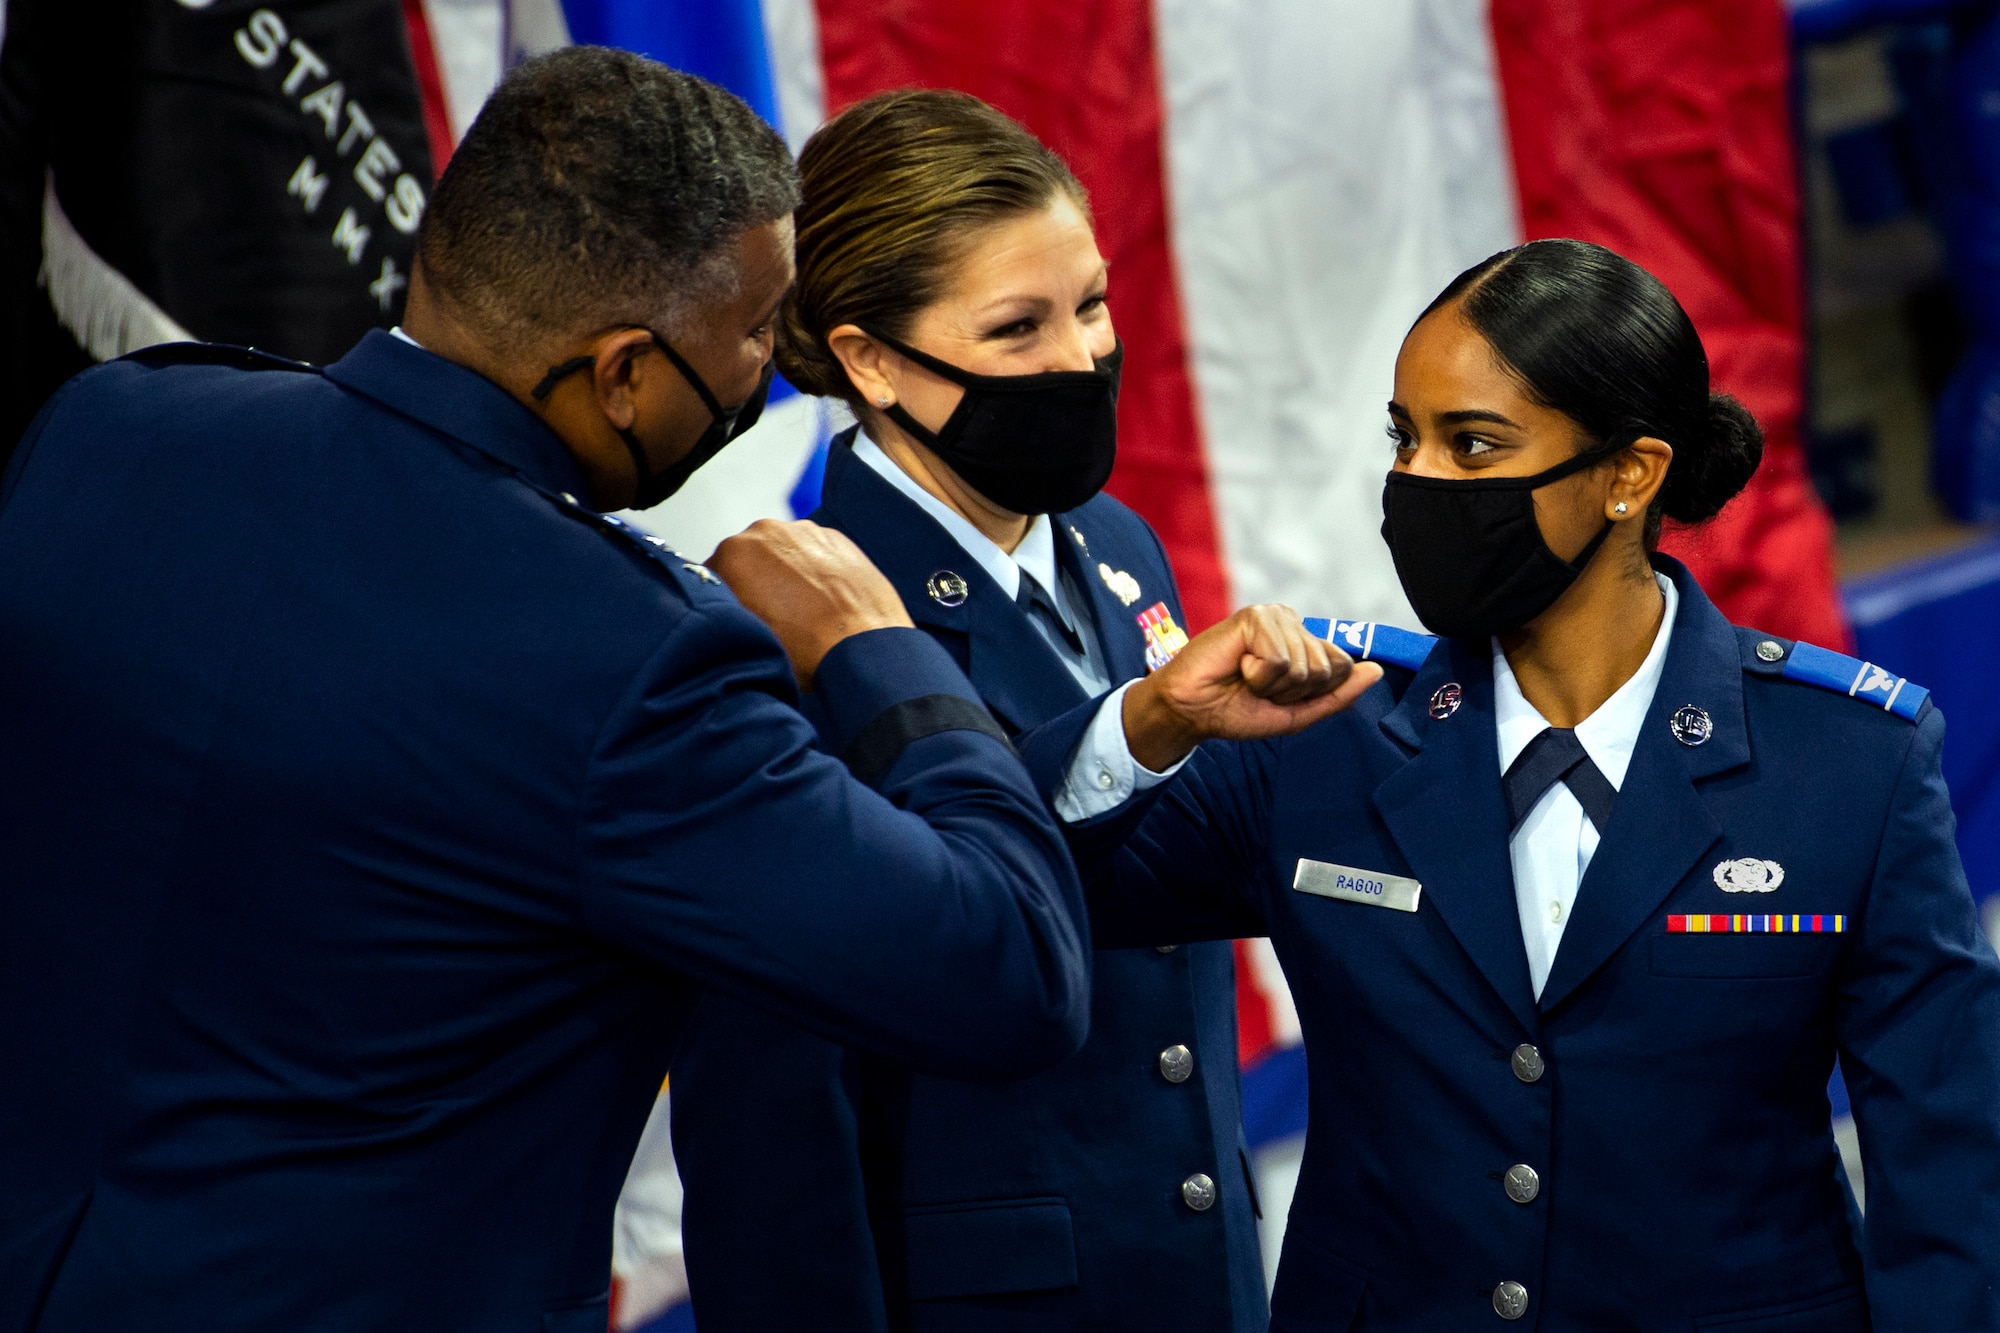 A U. S. Air Force Academy Preparatory School cadet candidate bumps elbows with Lt. Gen. Richard Clark, the Academy’s superintendent, at the prep school’s graduation ceremony May 12, 2021.